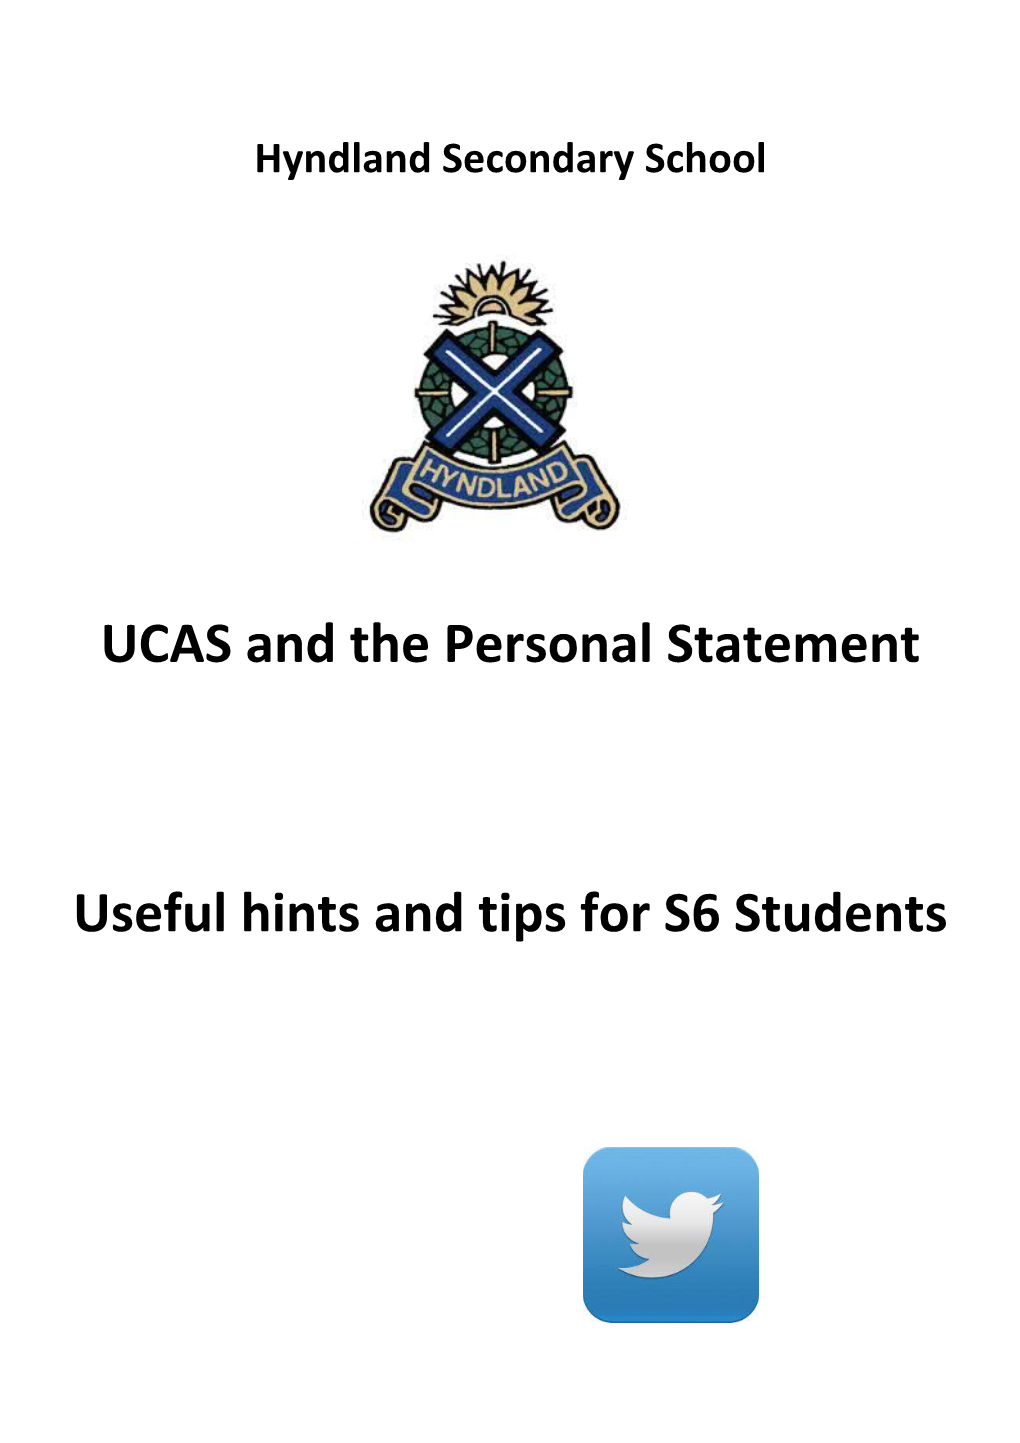 UCAS and the Personal Statement